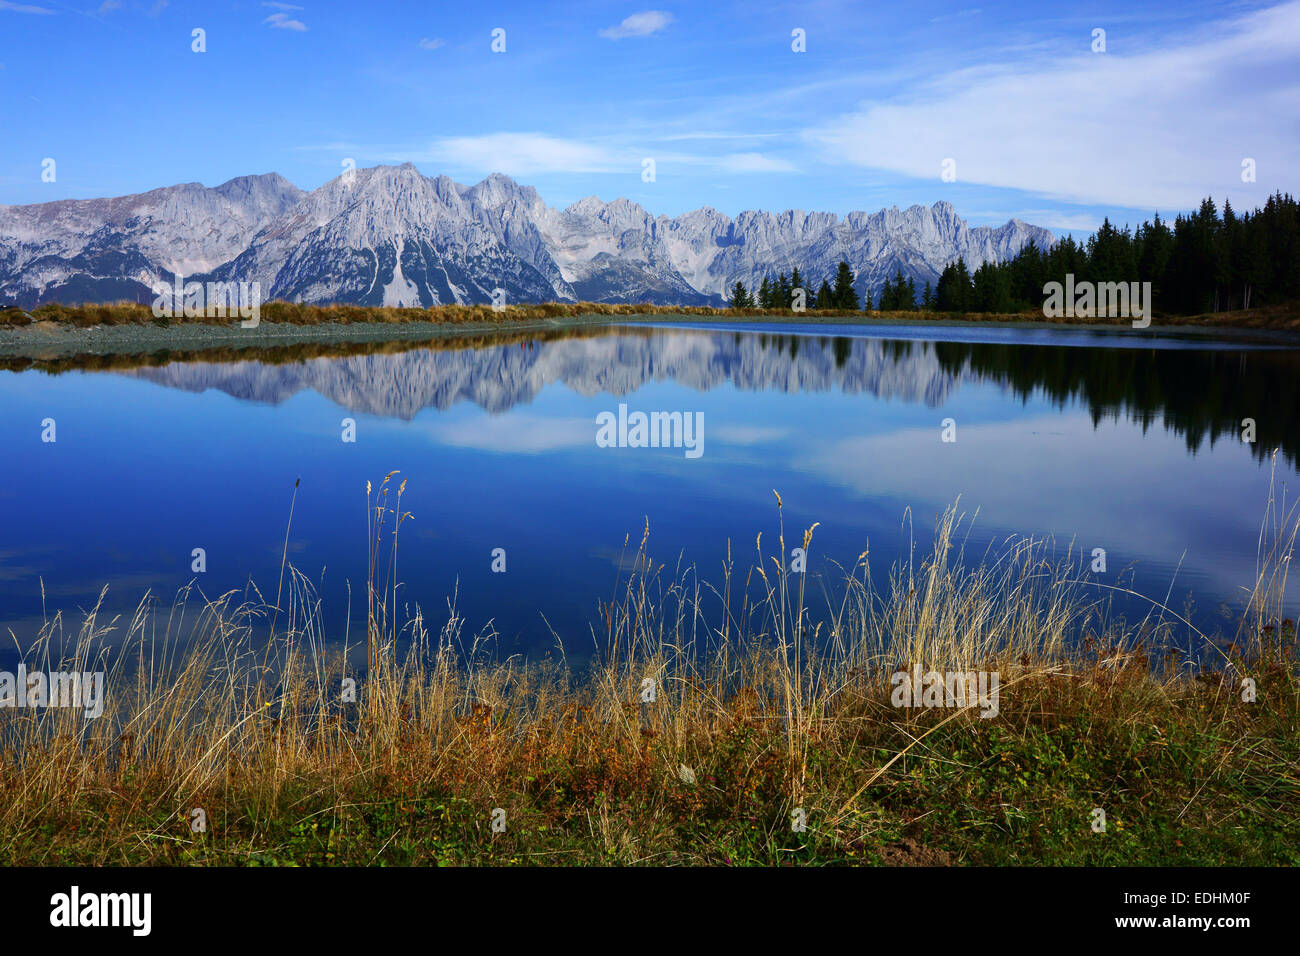 Wilder Kaiser mountains reflecting in artifical pond used for artifcial snow production, Hartkaiser ski area. Tirol, Austria Stock Photo